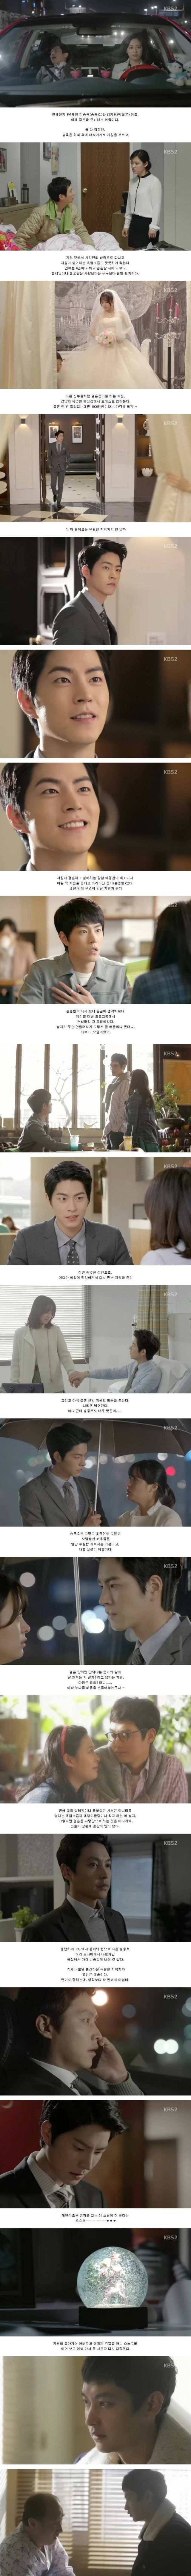 captures for the Korean drama 'Drama Special - Why I'm Getting Married'